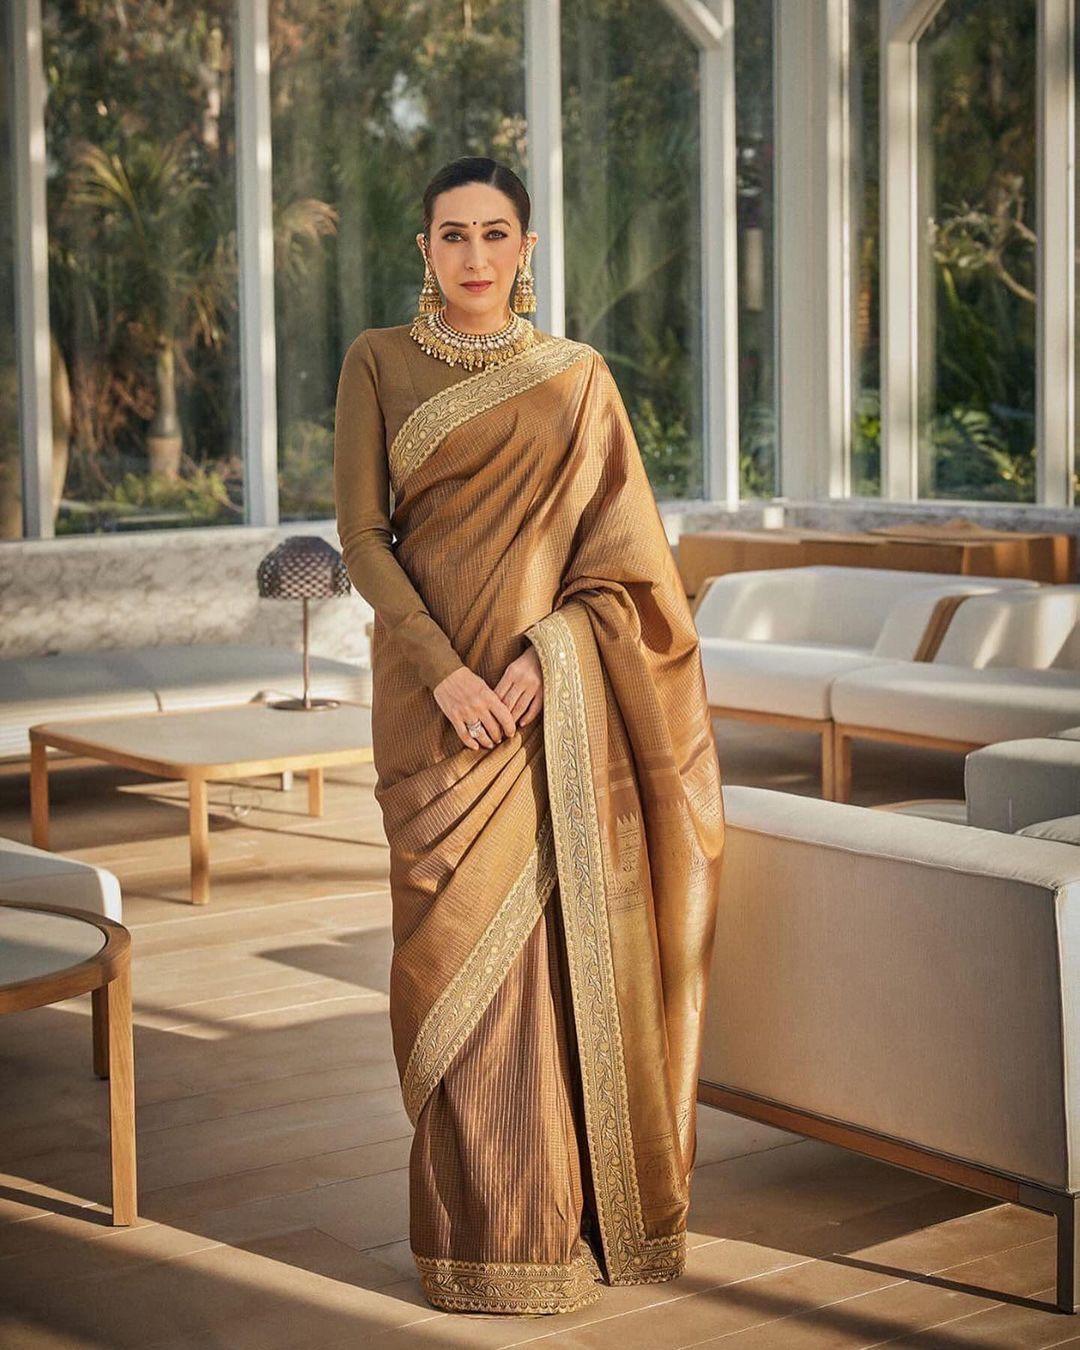 Karisma Kapoor wore a beautiful brown saree at a big event put on by the Ambani Family. Her outfit was put together by stylist Vrinda Narang. 